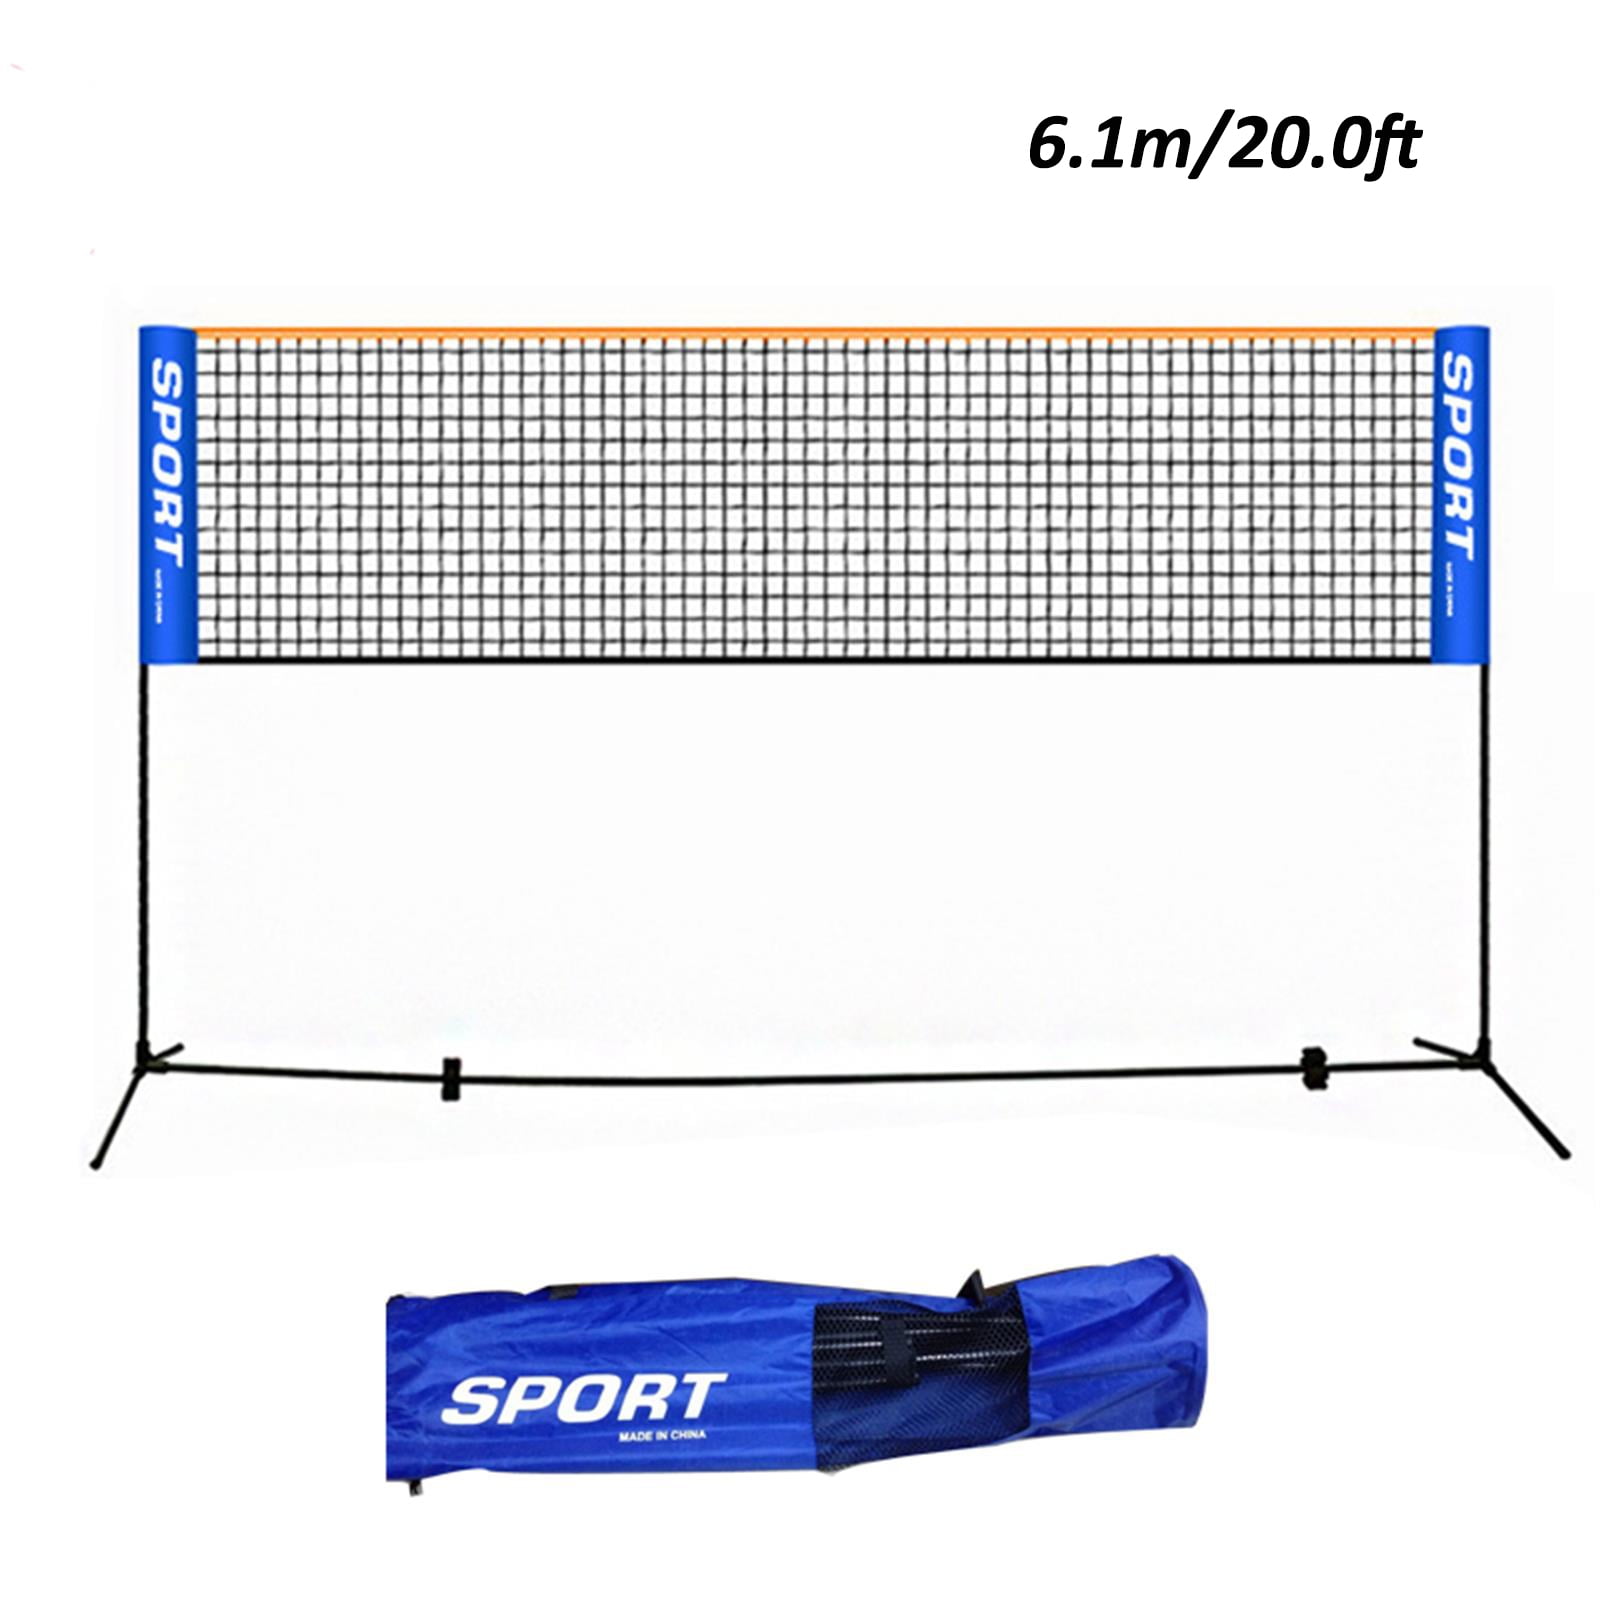 5.1M Extra Wide Foldable Portable Badminton Volleyball Tennis Net W/ Frame Stand 